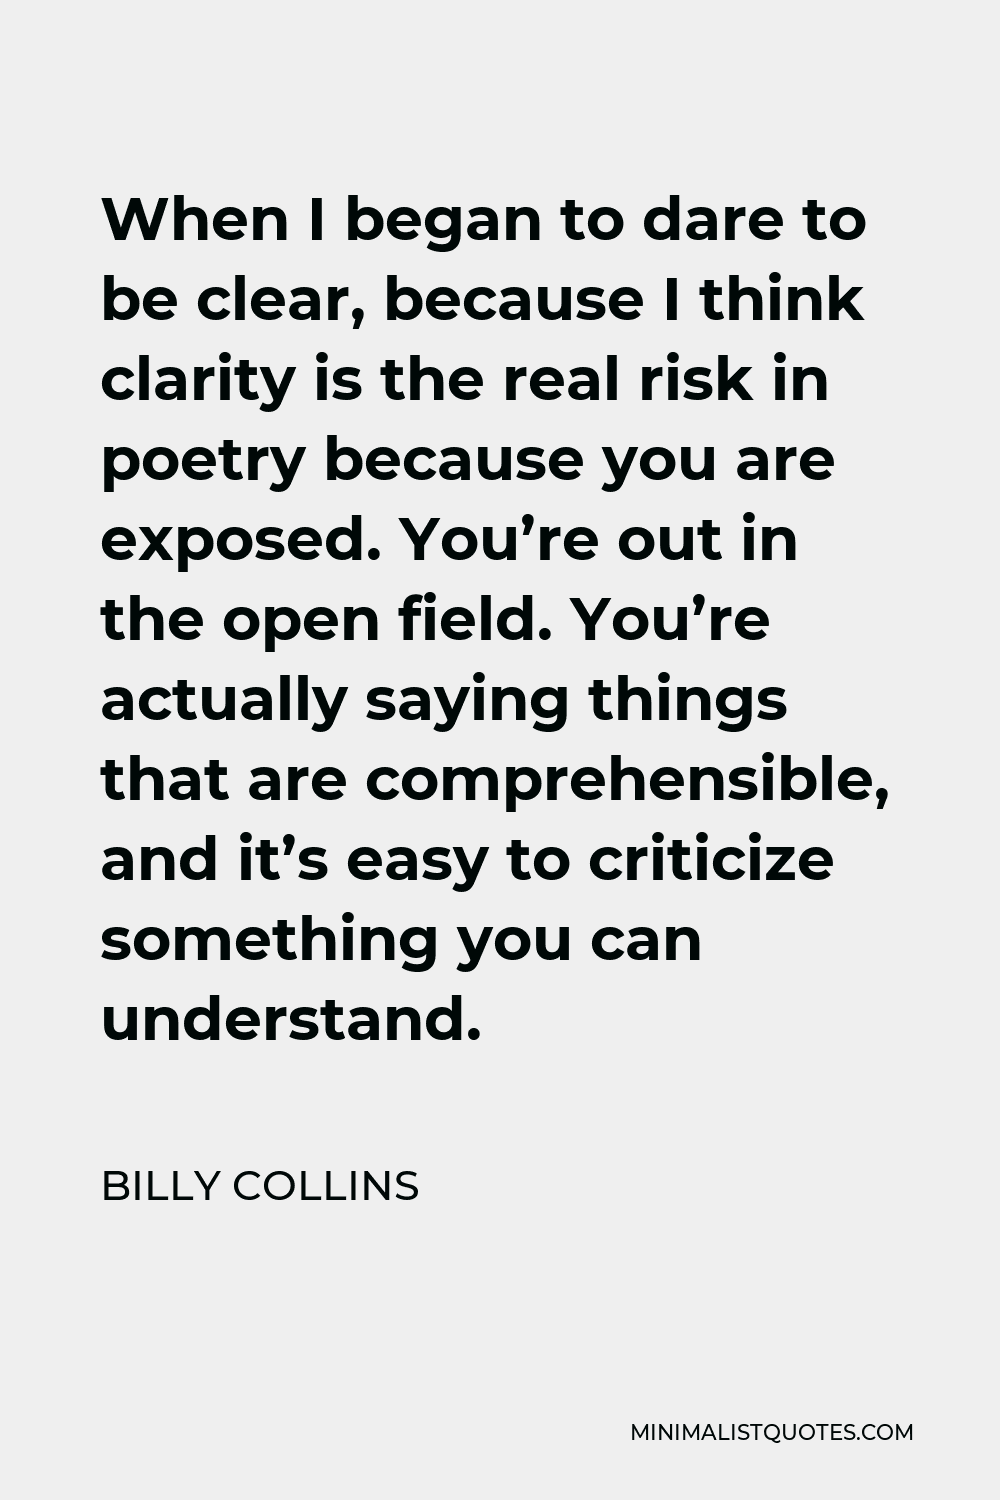 Billy Collins Quote - When I began to dare to be clear, because I think clarity is the real risk in poetry because you are exposed. You’re out in the open field. You’re actually saying things that are comprehensible, and it’s easy to criticize something you can understand.